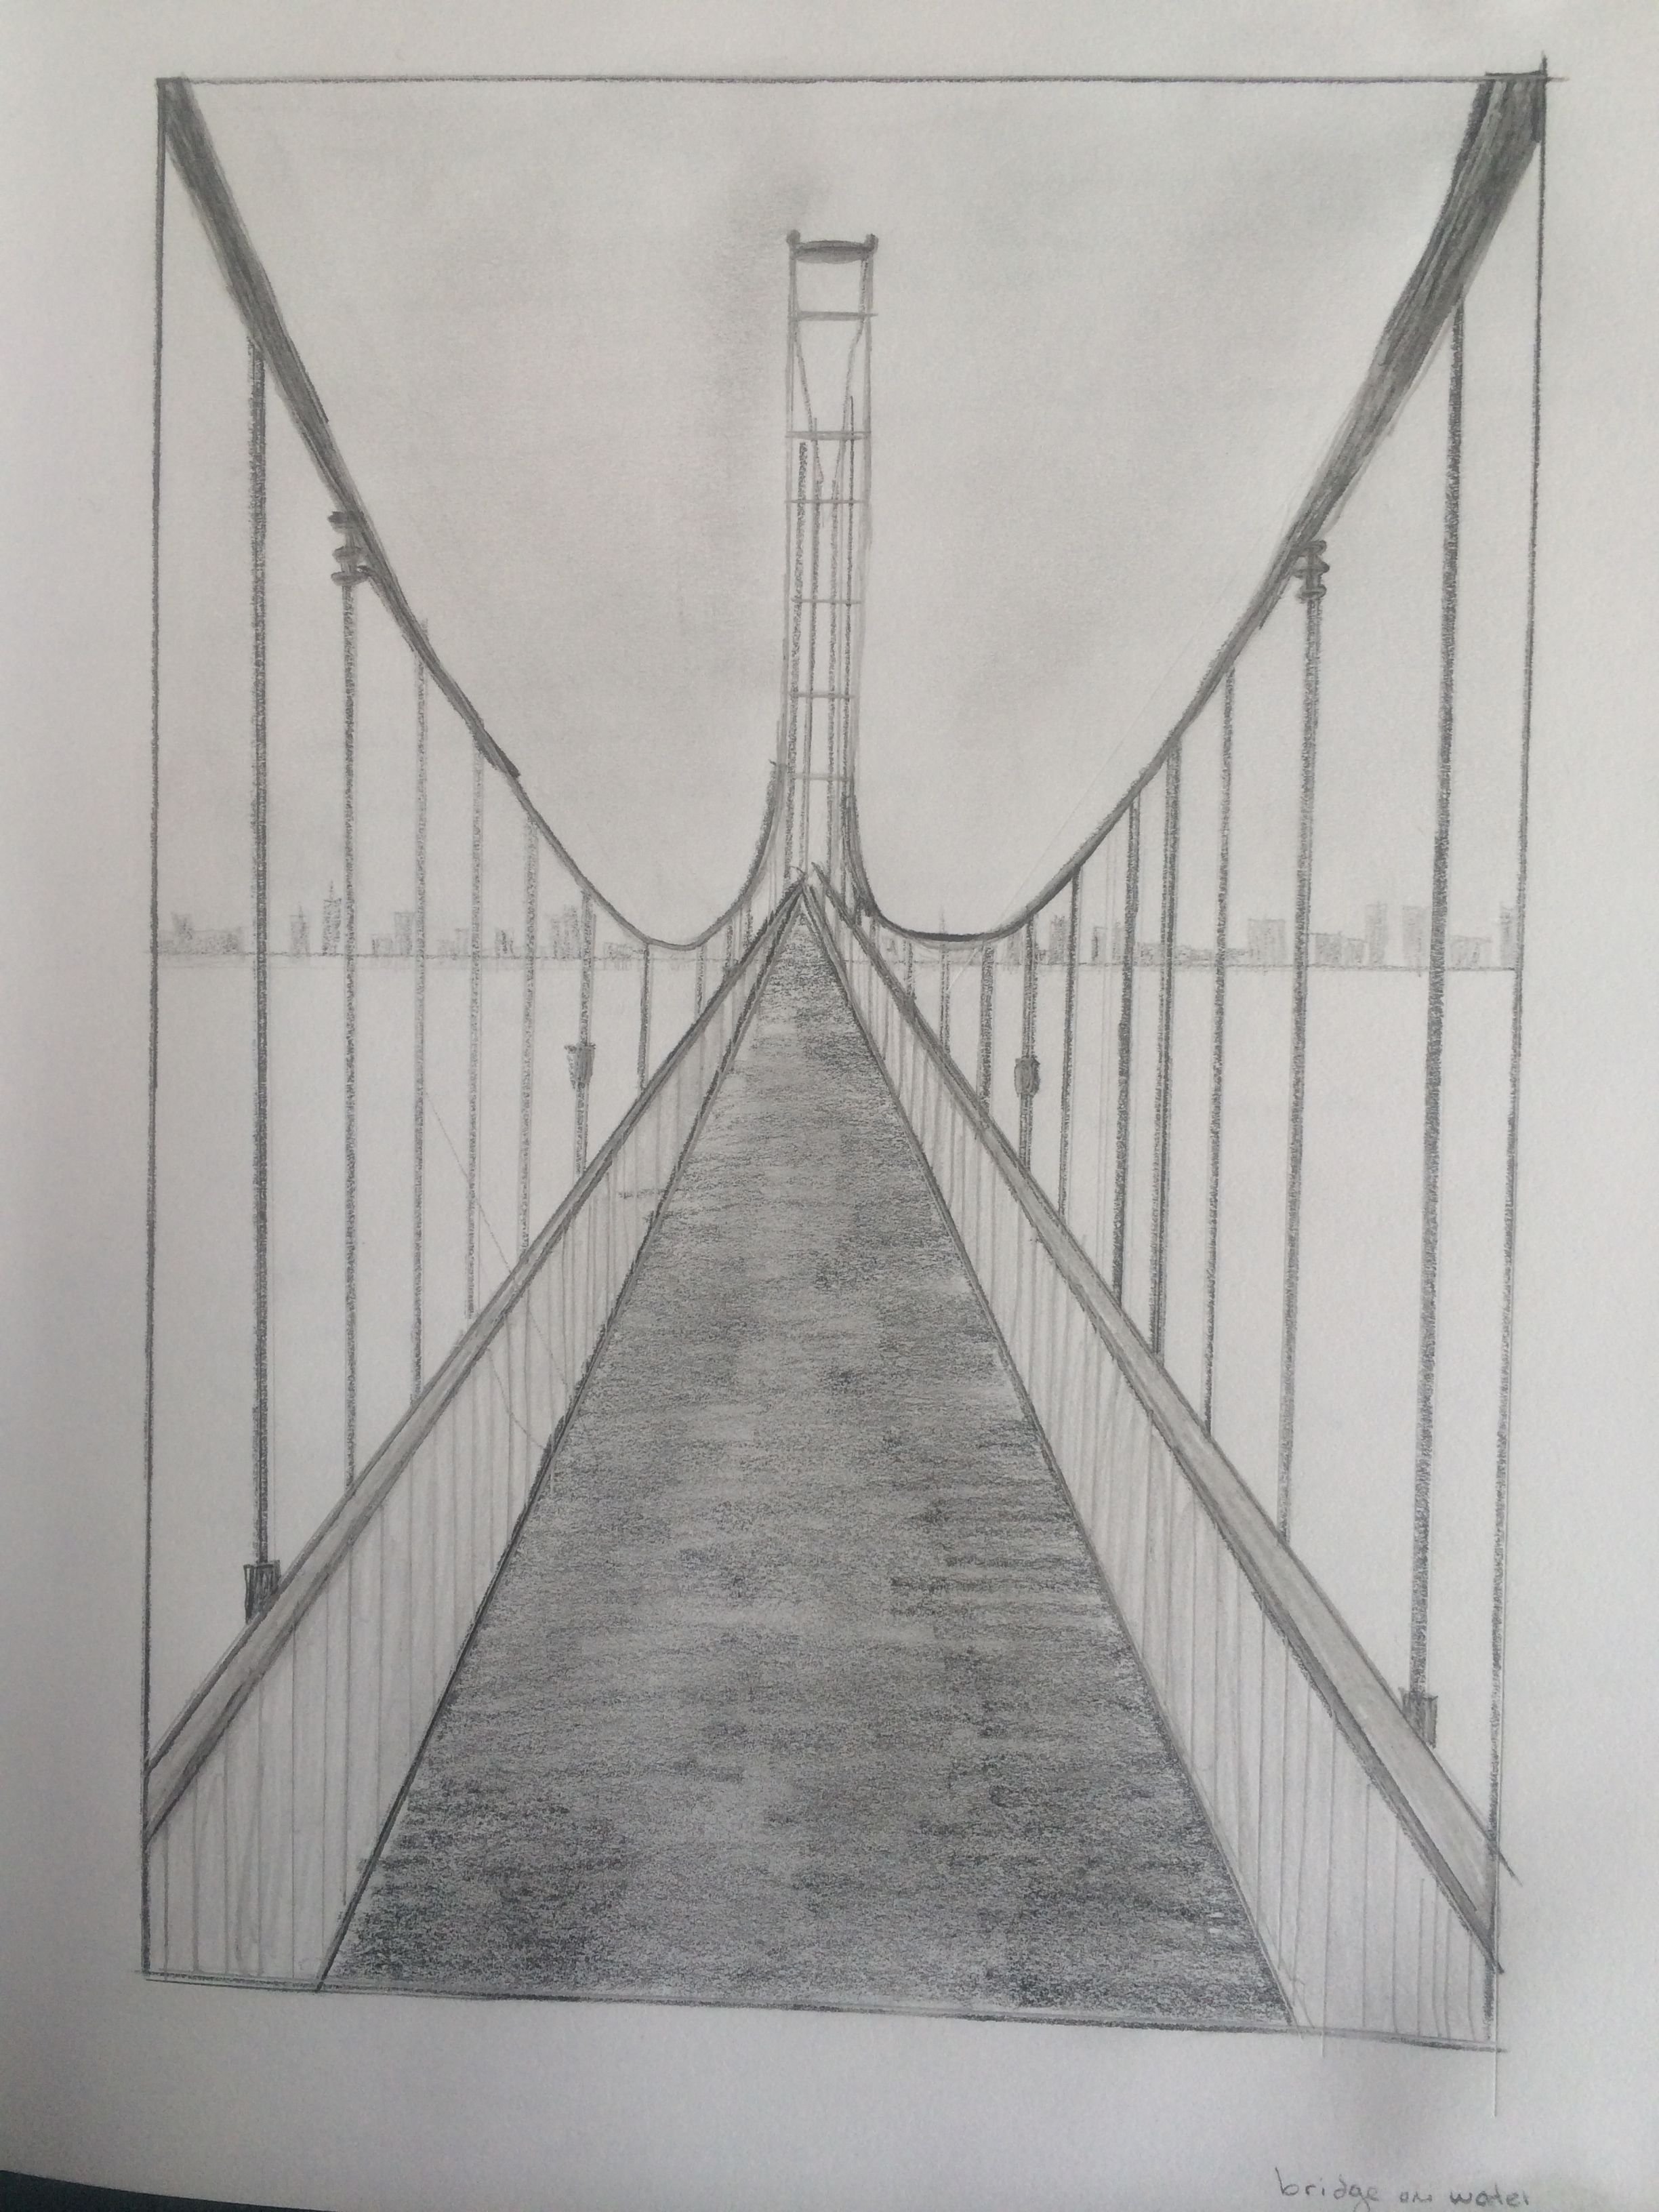 One Point Perspective Bridge Drawing at Explore